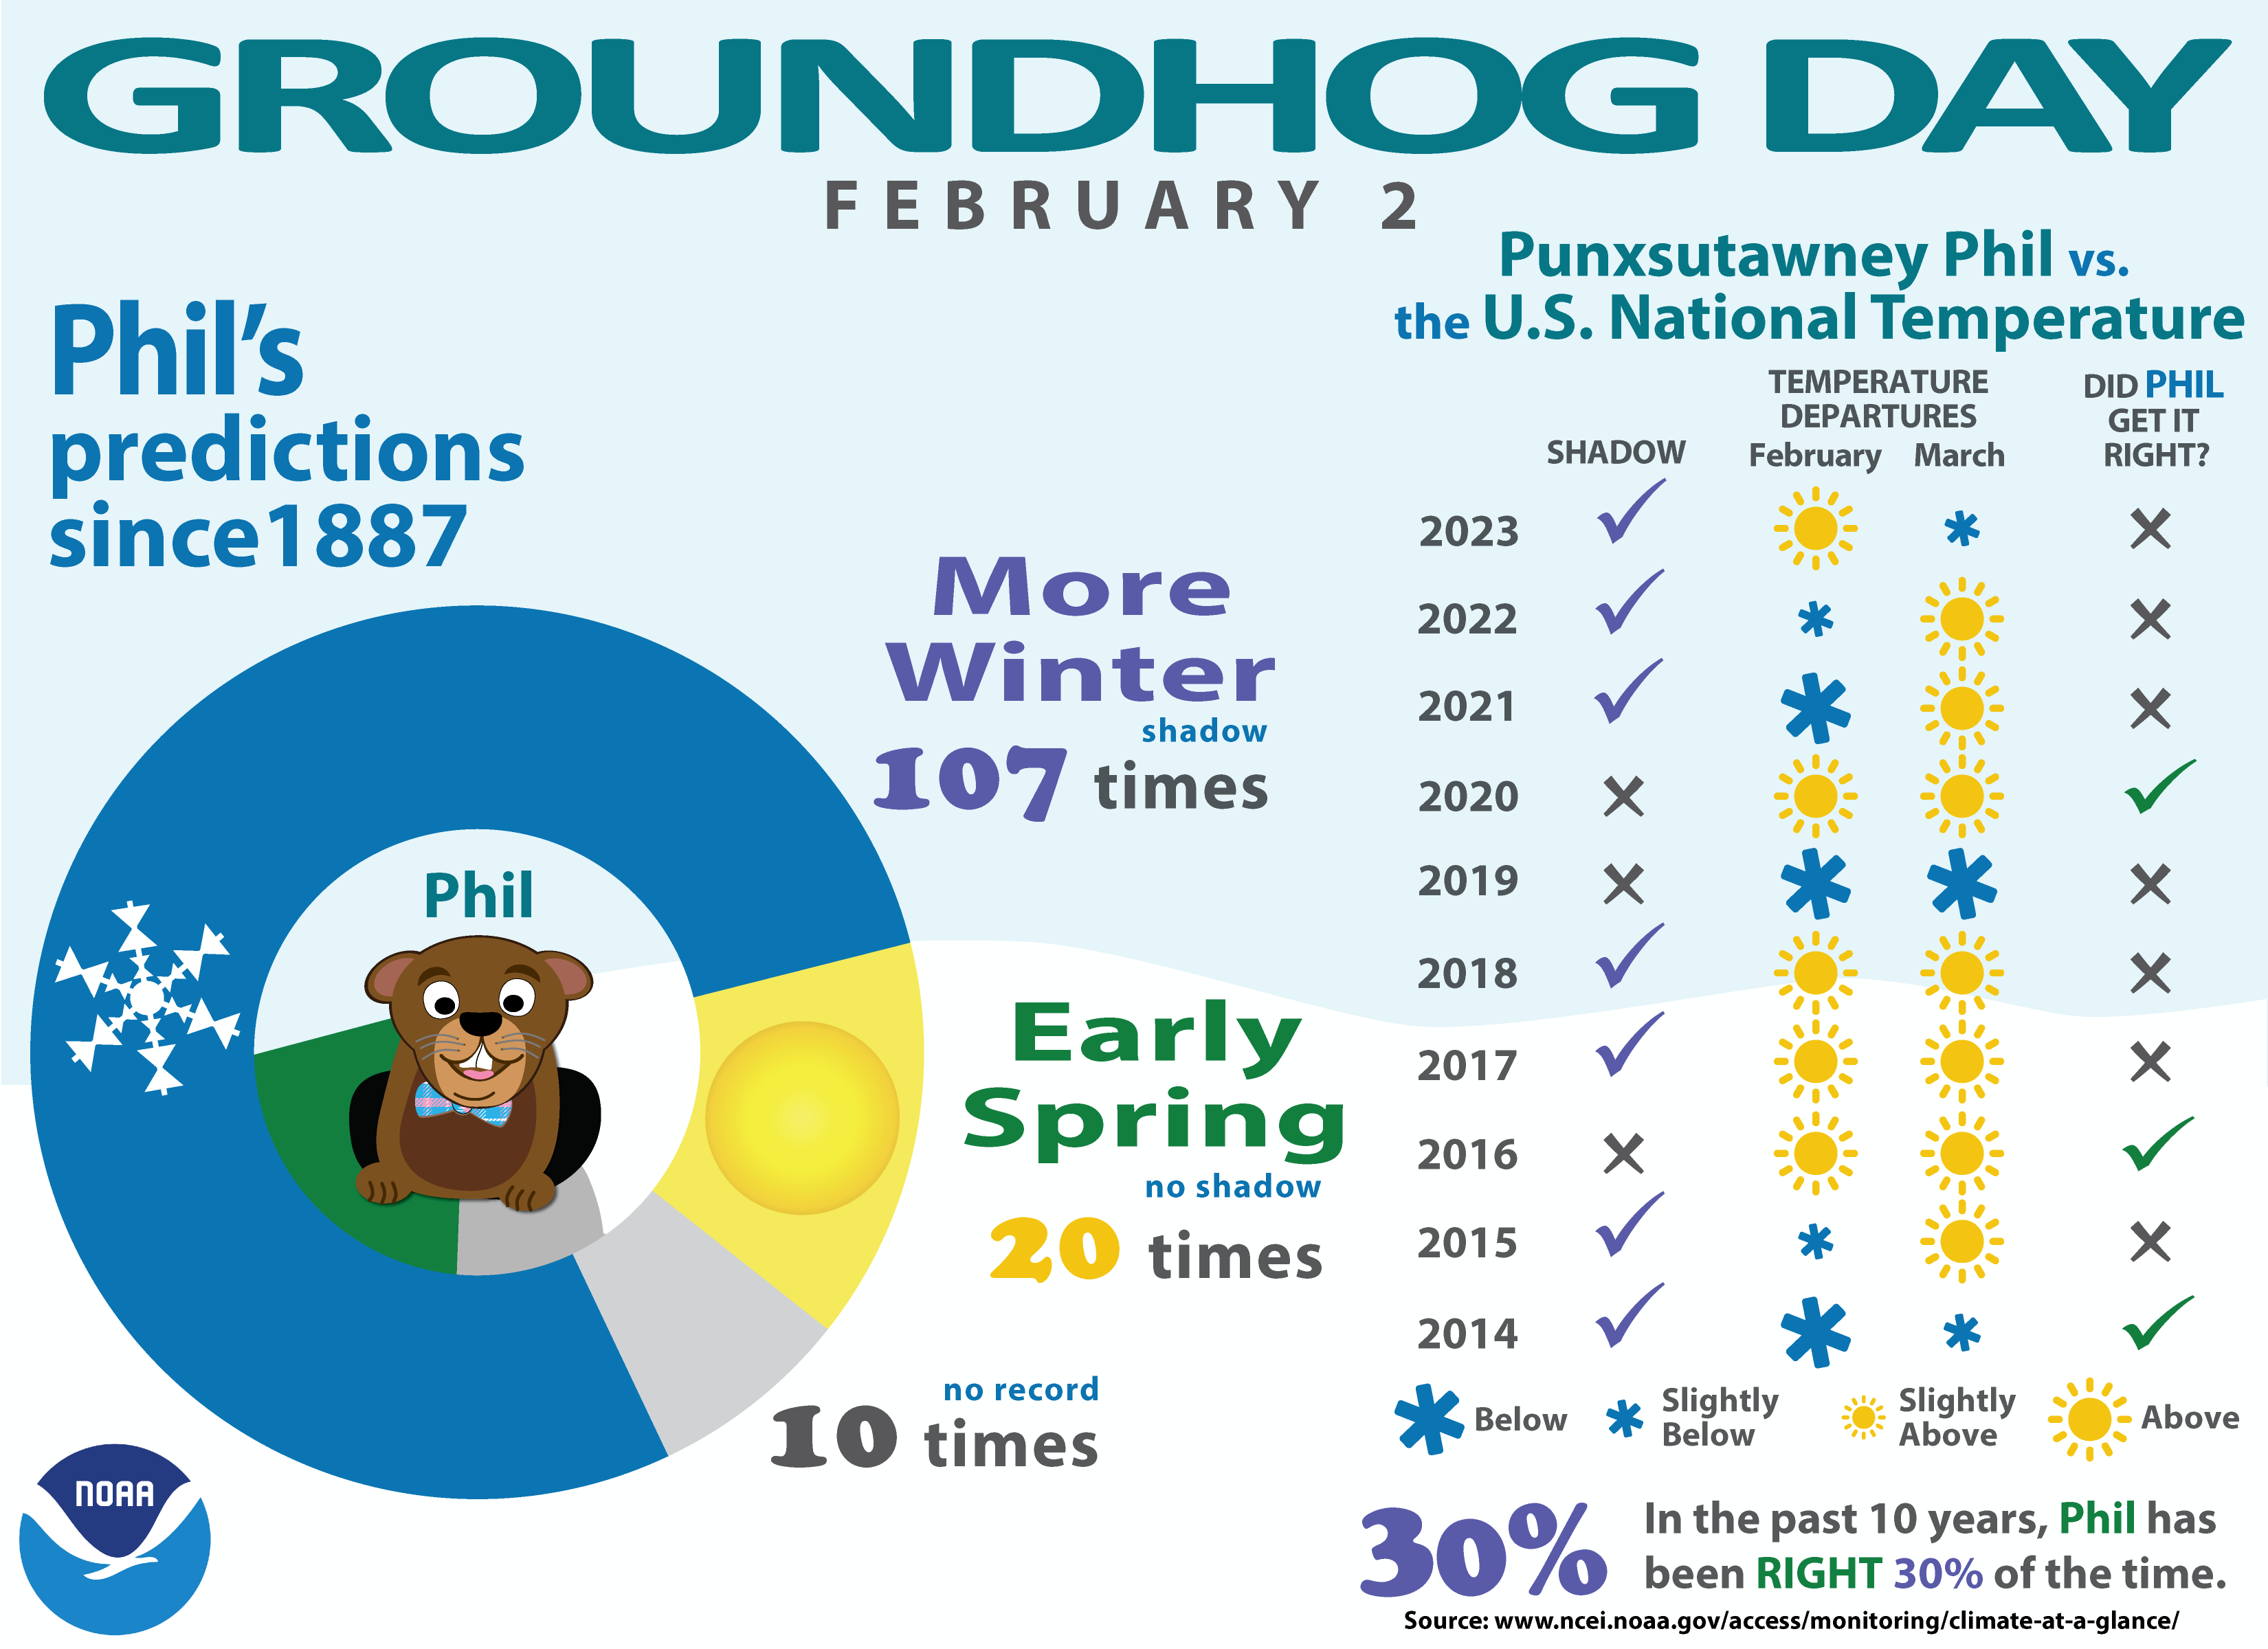 How accurate is the groundhog?